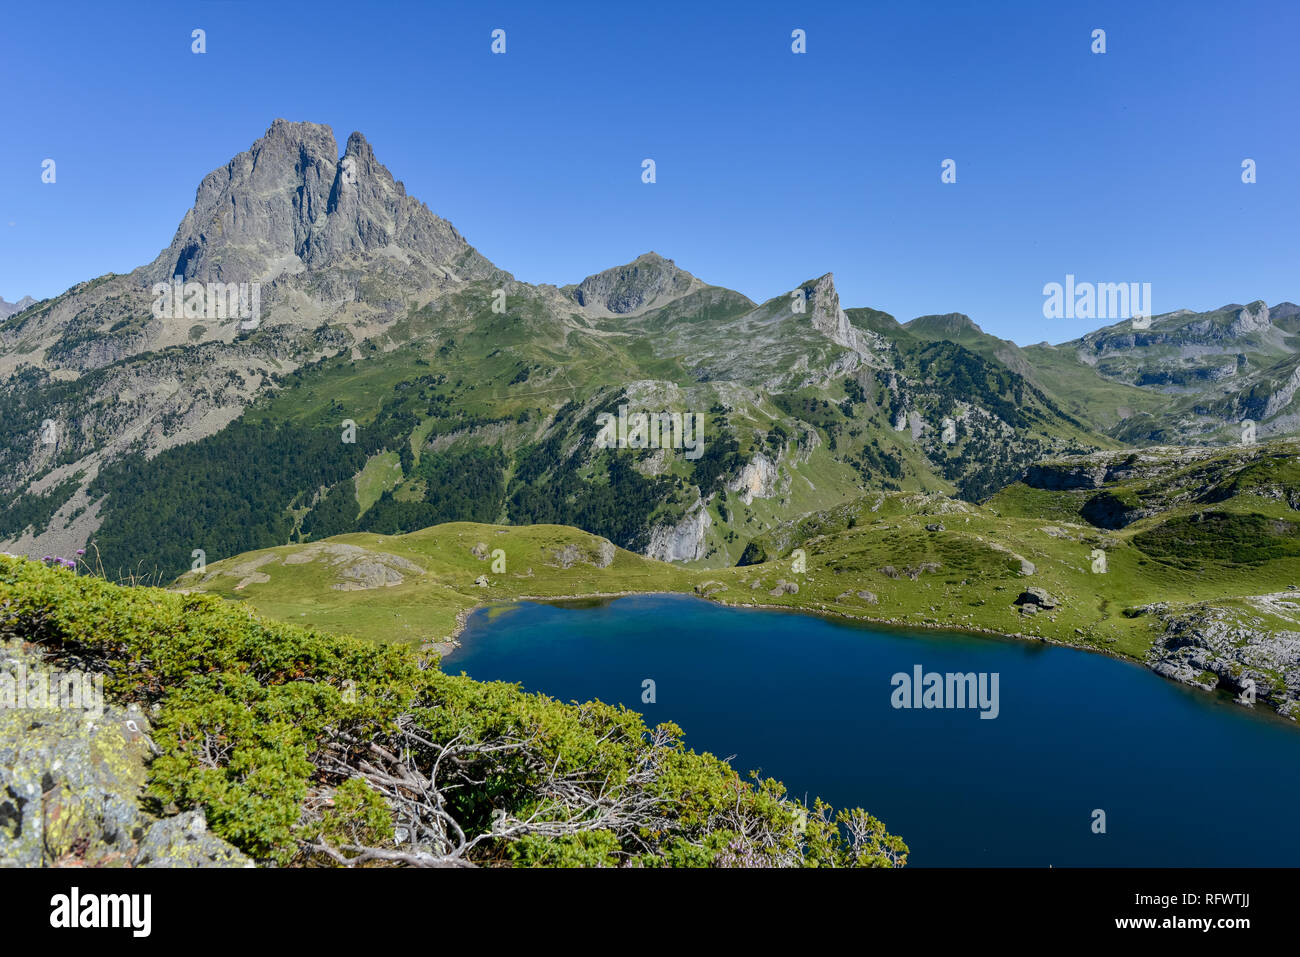 Lac du Miey and Pic Midi d'Ossau seen from the GR10 hiking trail in the French Pyrenees, Pyrenees Atlantiques, France, Europe Stock Photo